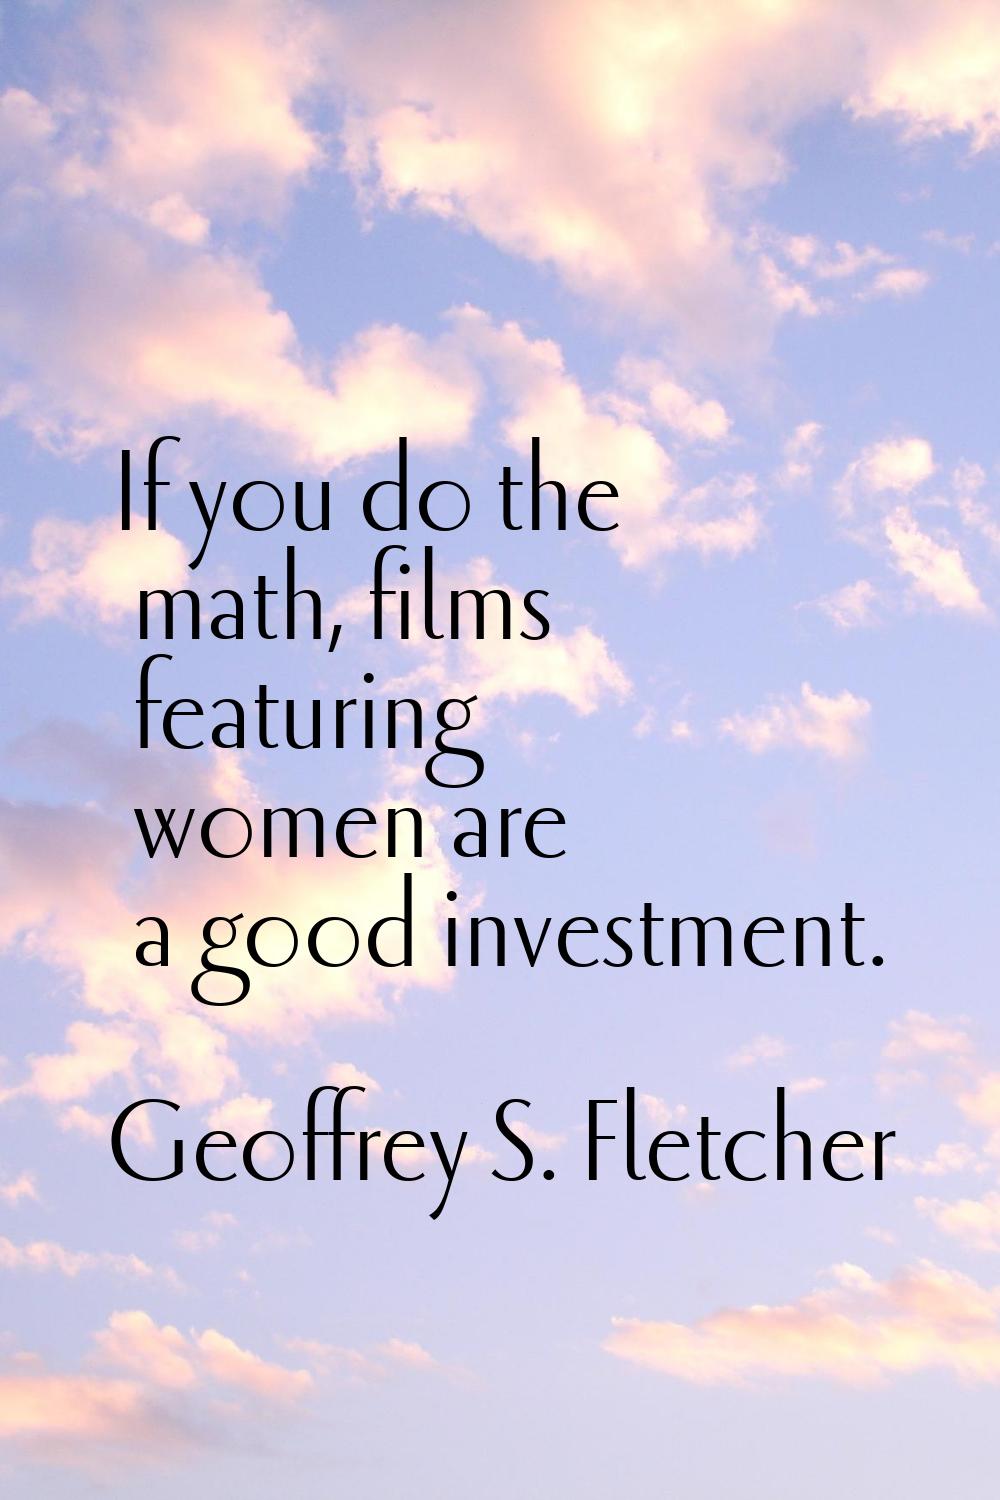 If you do the math, films featuring women are a good investment.